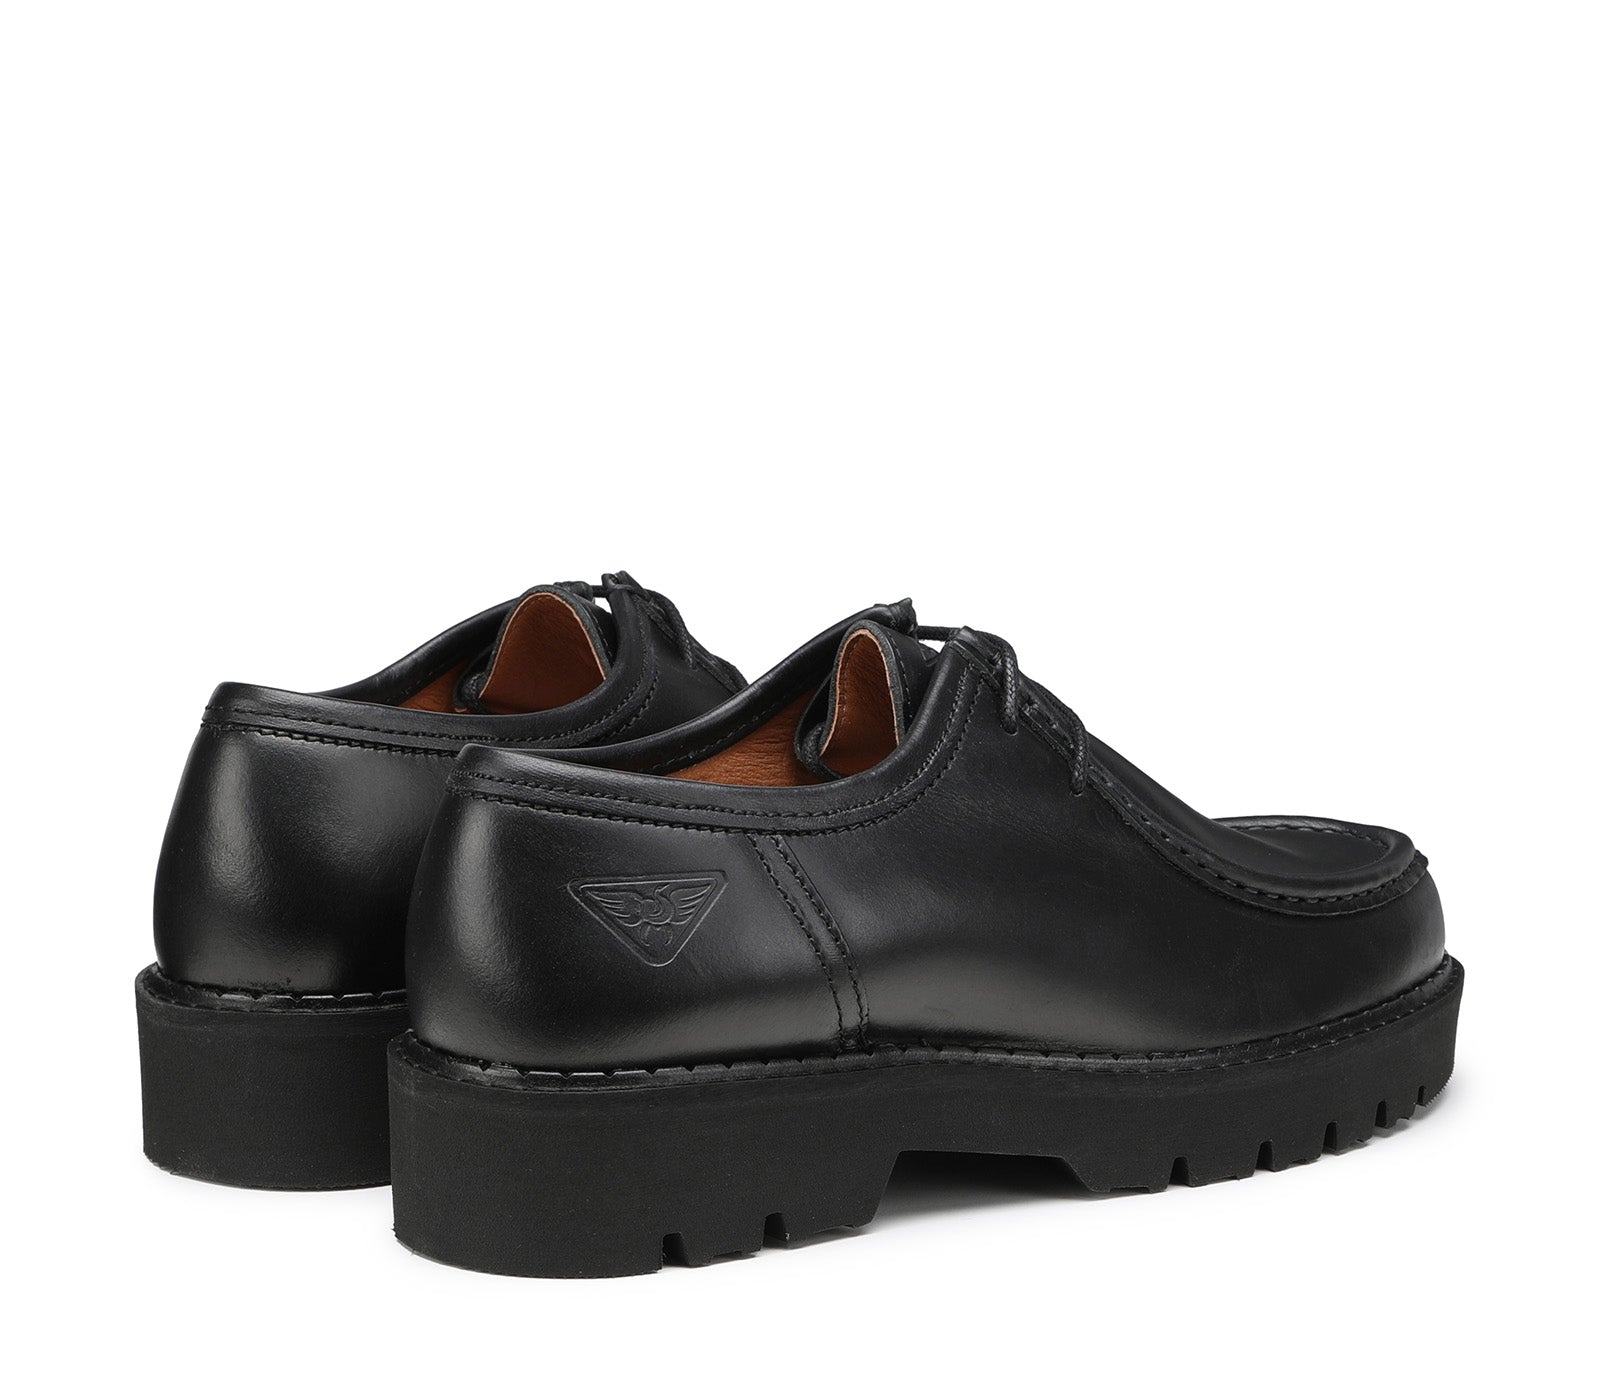 Black Men's Moccasin with Laces and Carrarmato Sole